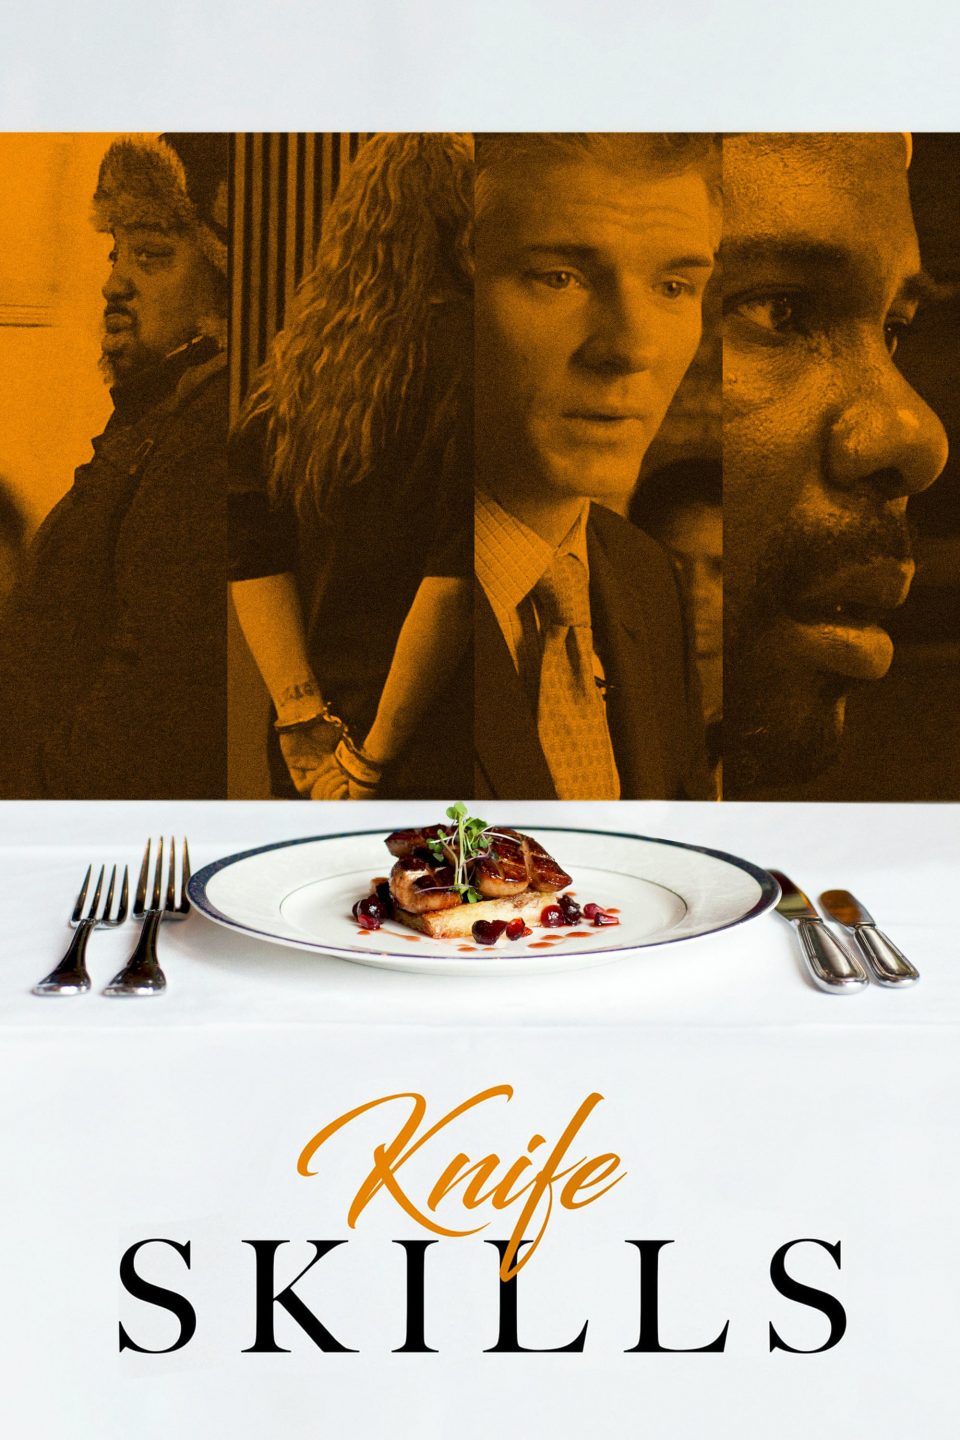 Poster for the movie "Knife Skills"